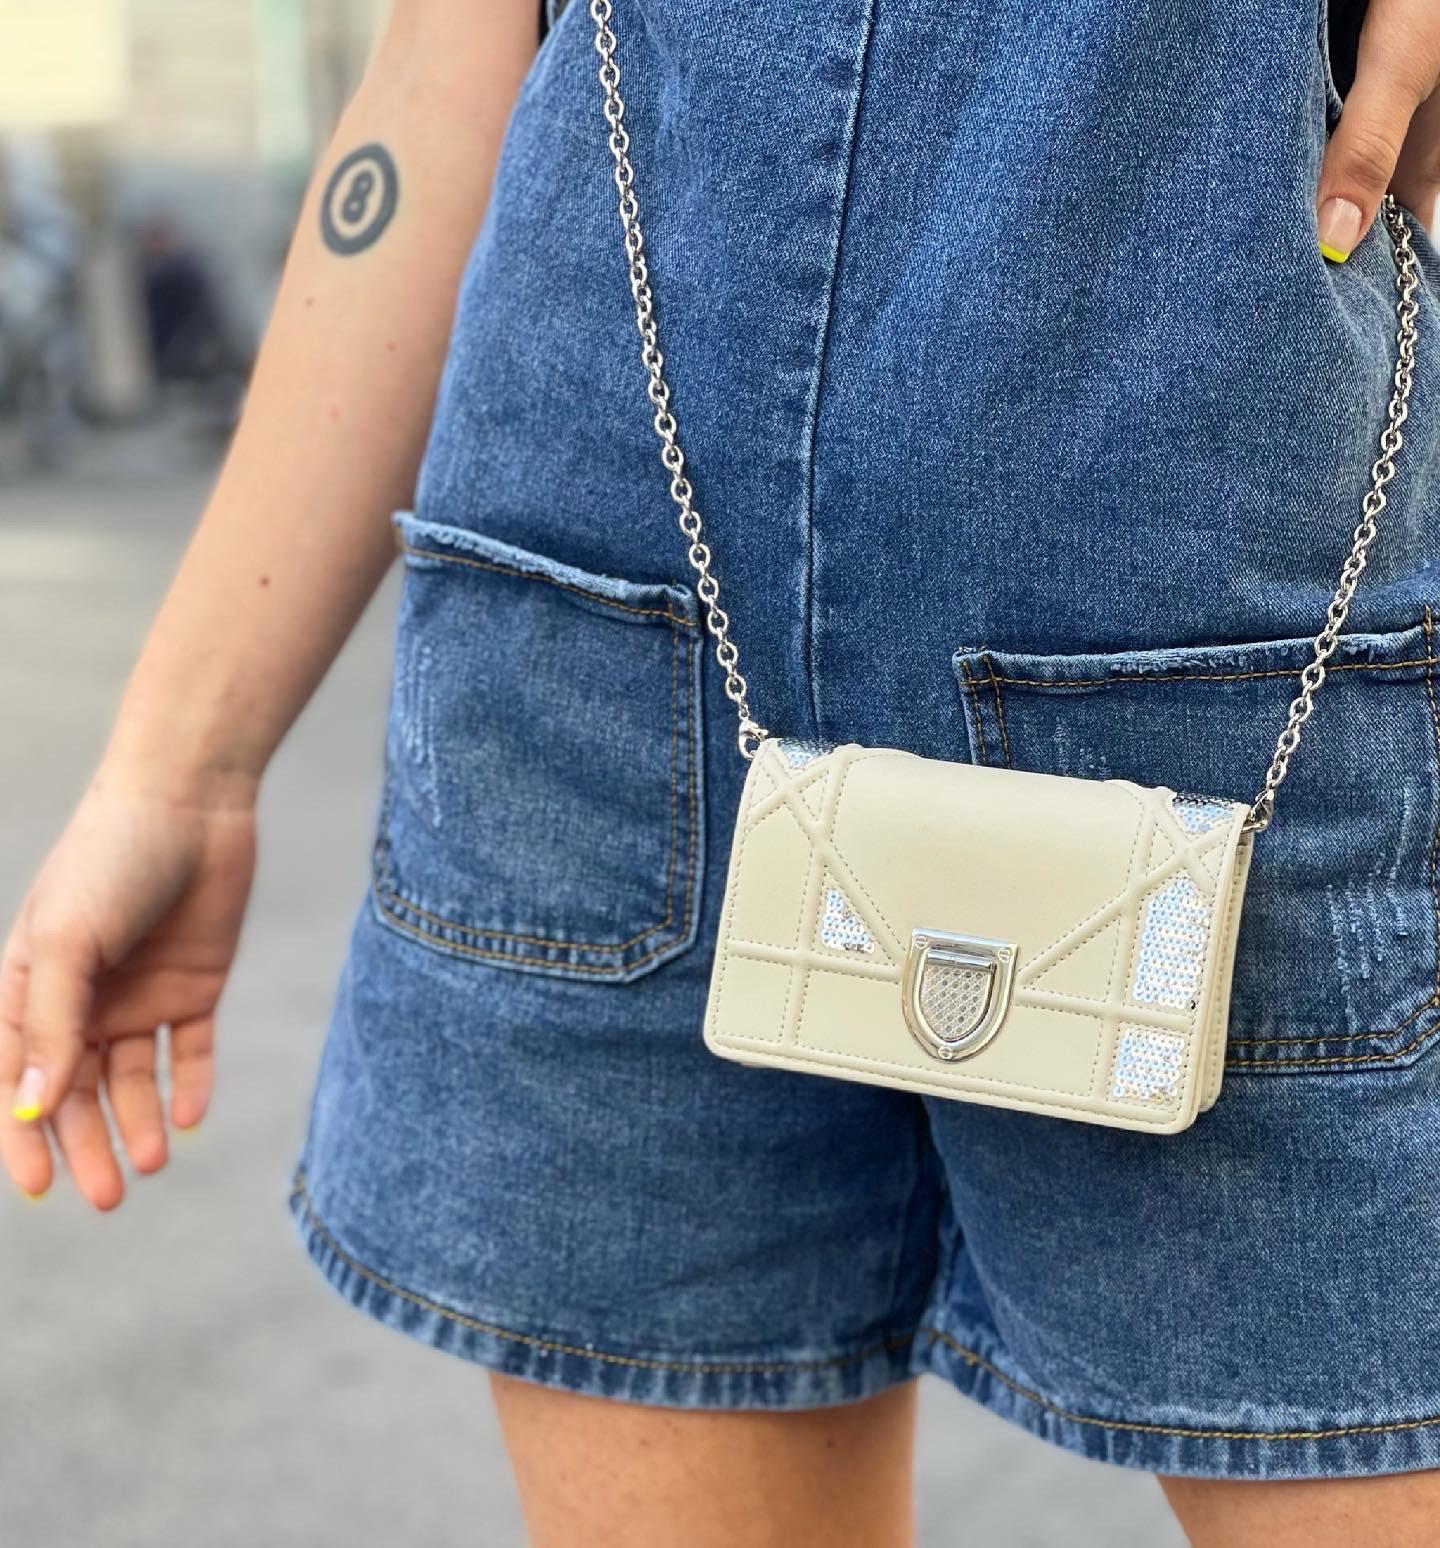 Mini shoulder bag by Dior, model Diorama, made of white leather with silver hardware embellished with silver sequins.

Equipped with a flap closure with button, internally lined in white leather, not very large.

Equipped with a removable chain